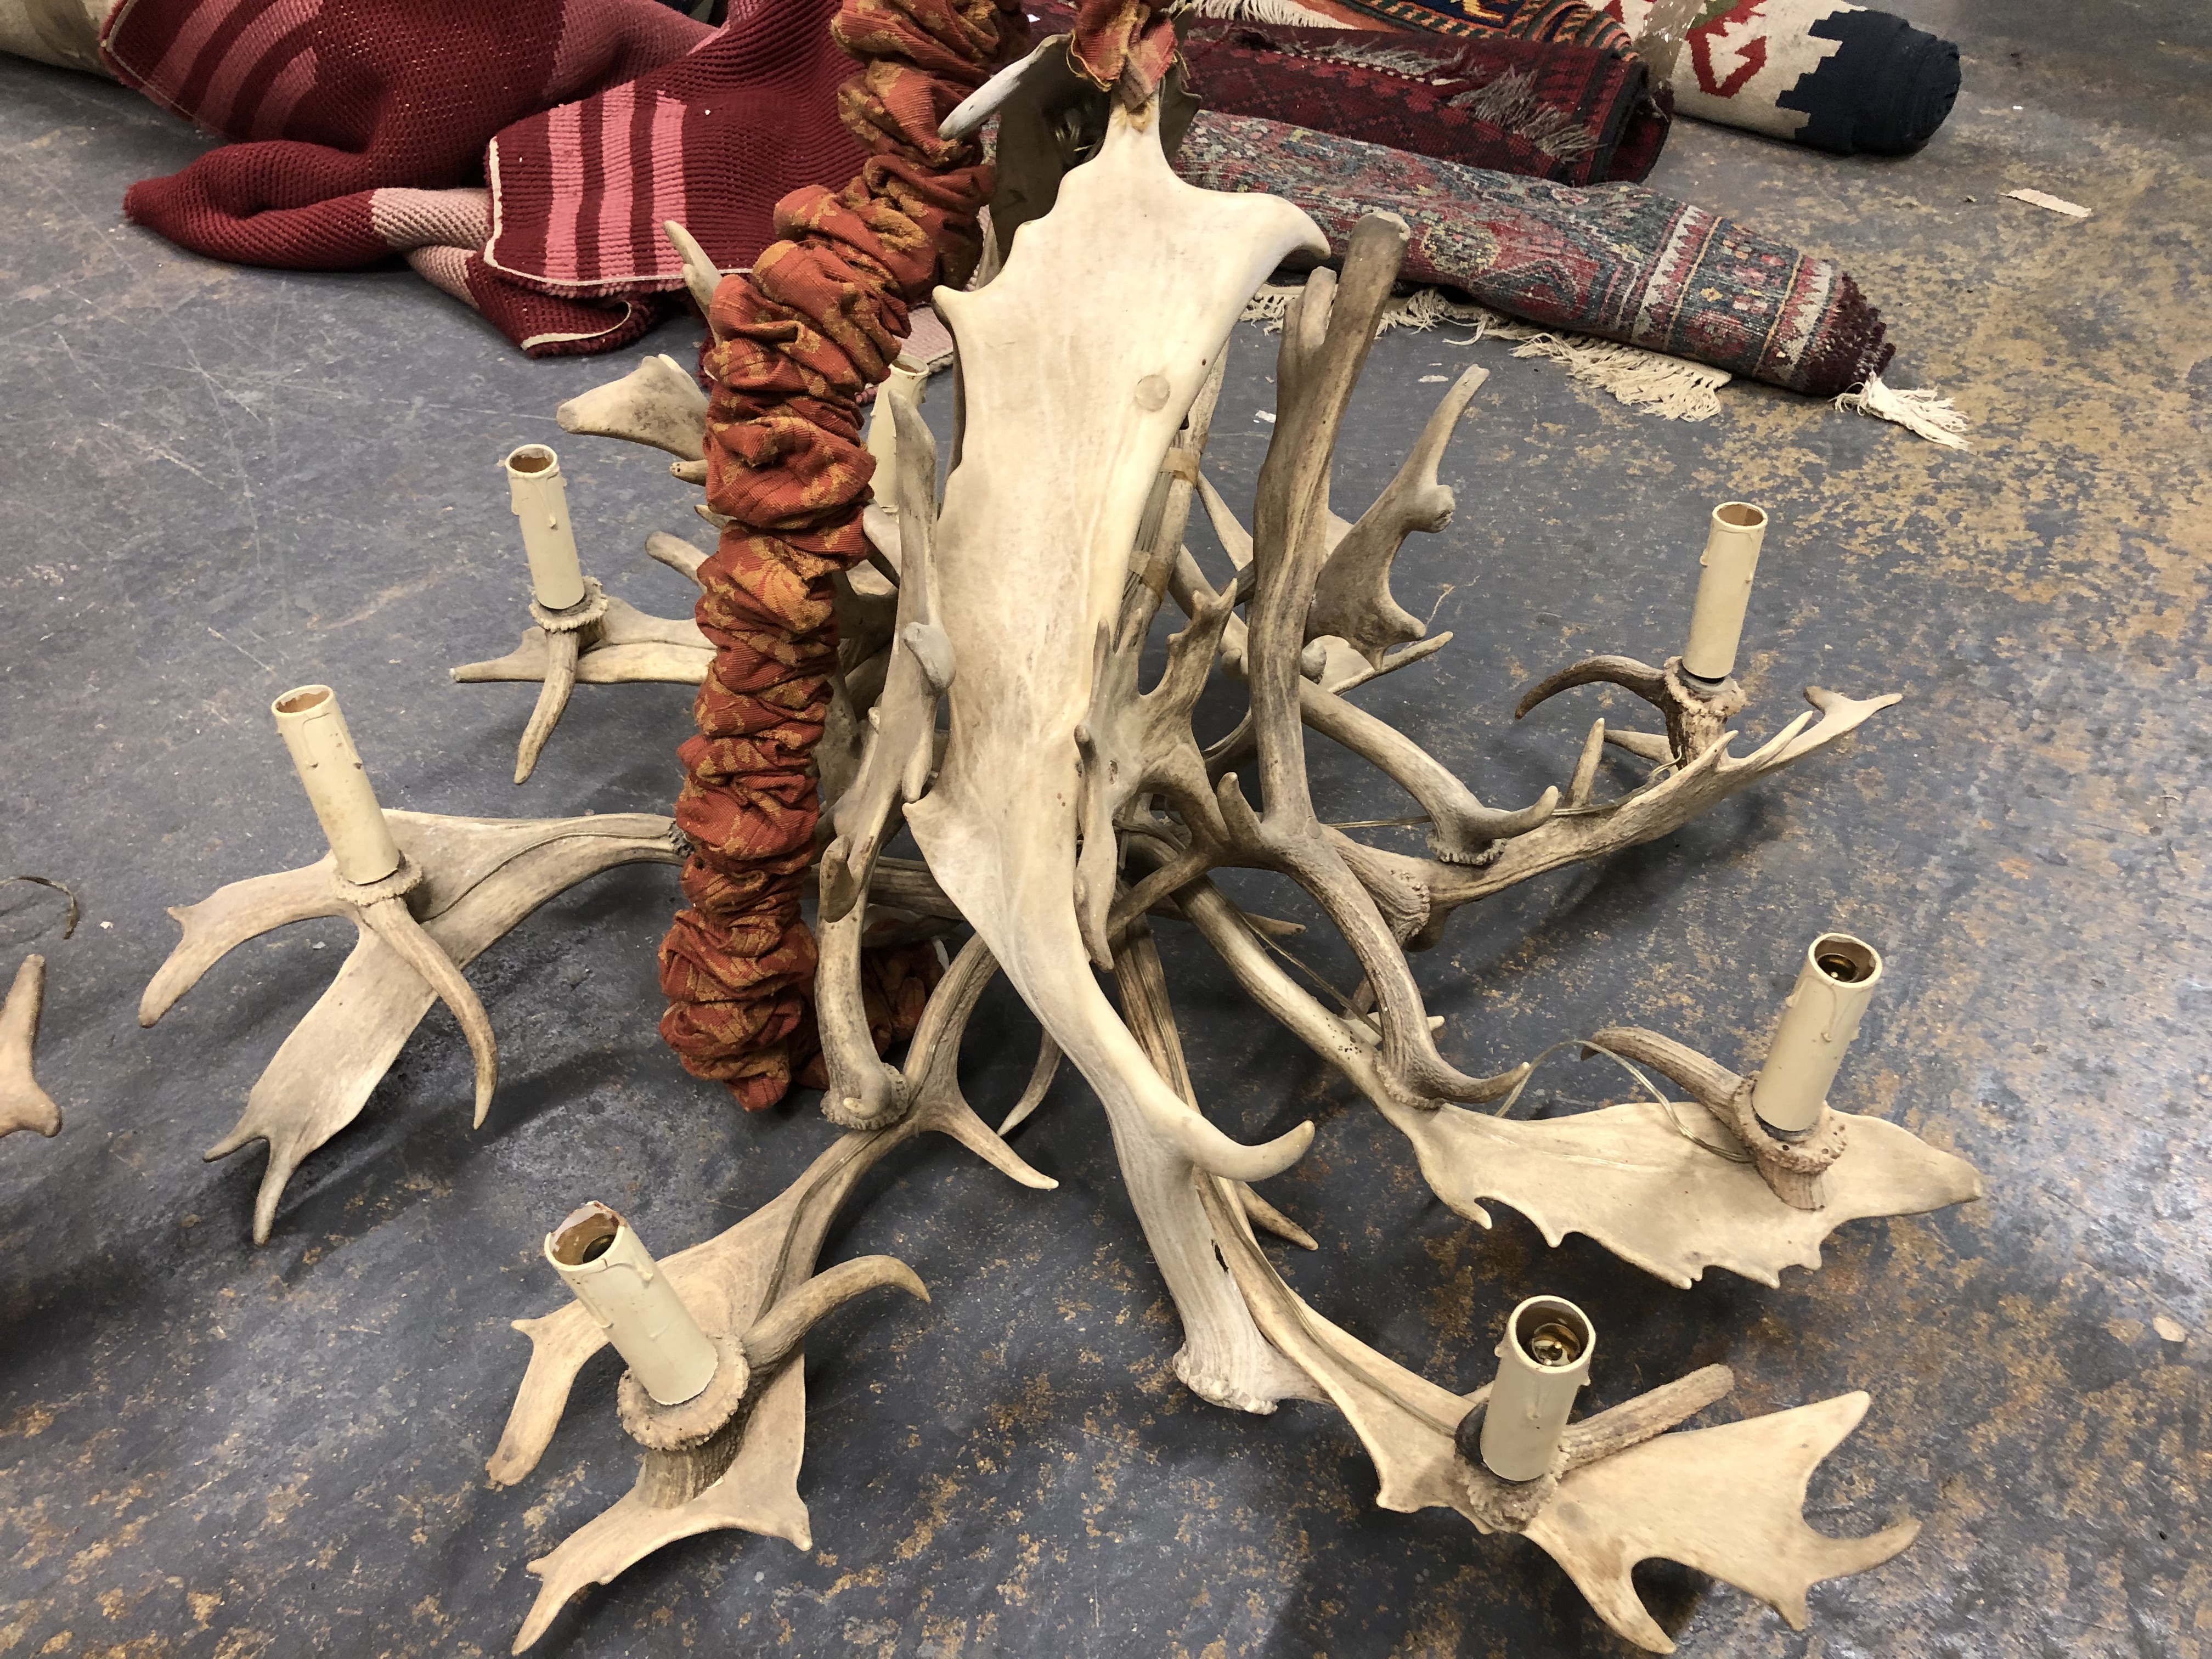 TWO LARGE ANTLER CHANDELIERS - Image 3 of 10